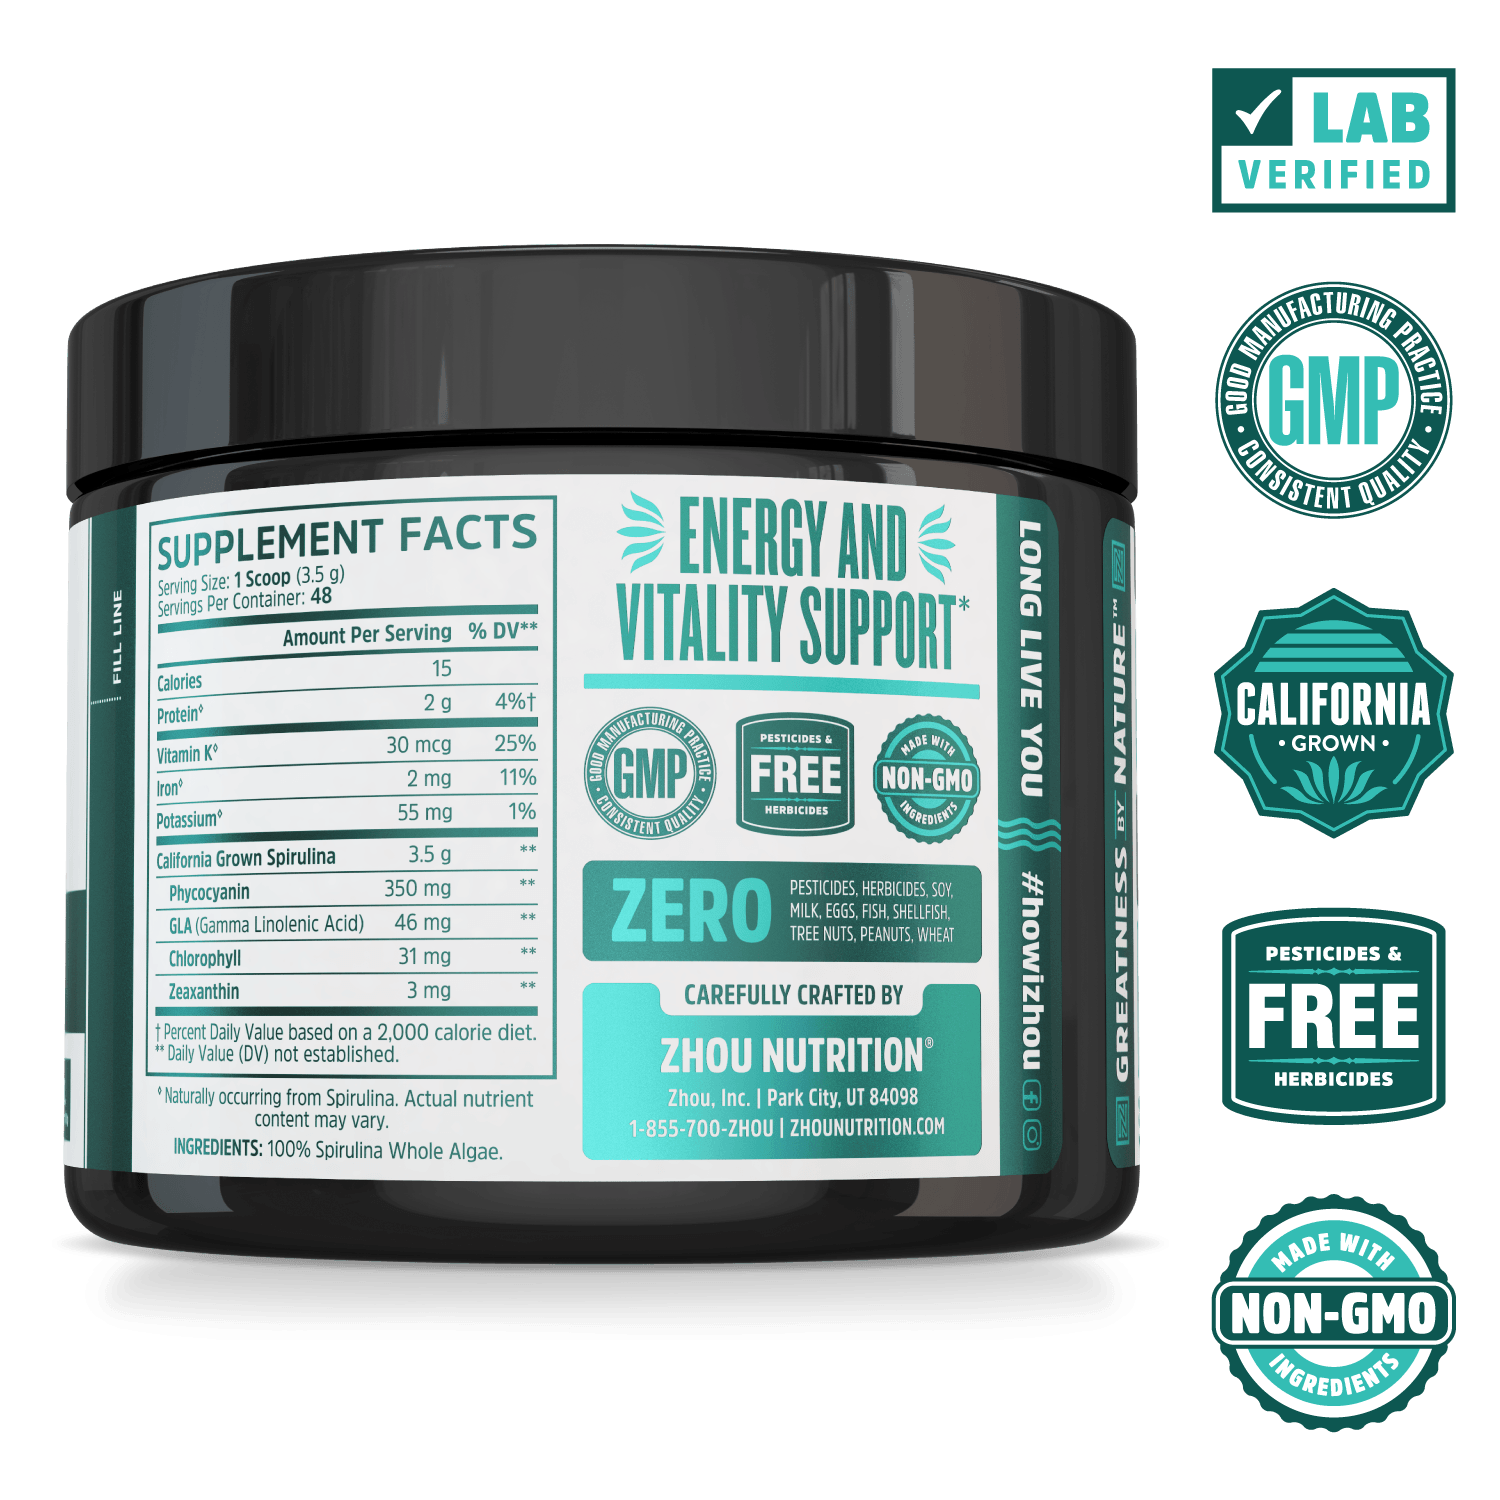 Zhou Nutrition California Spirulina Powder. Lab verified, good manufacturing practices, california grown, pesticides & herbicides free, made with non-GMO ingredients